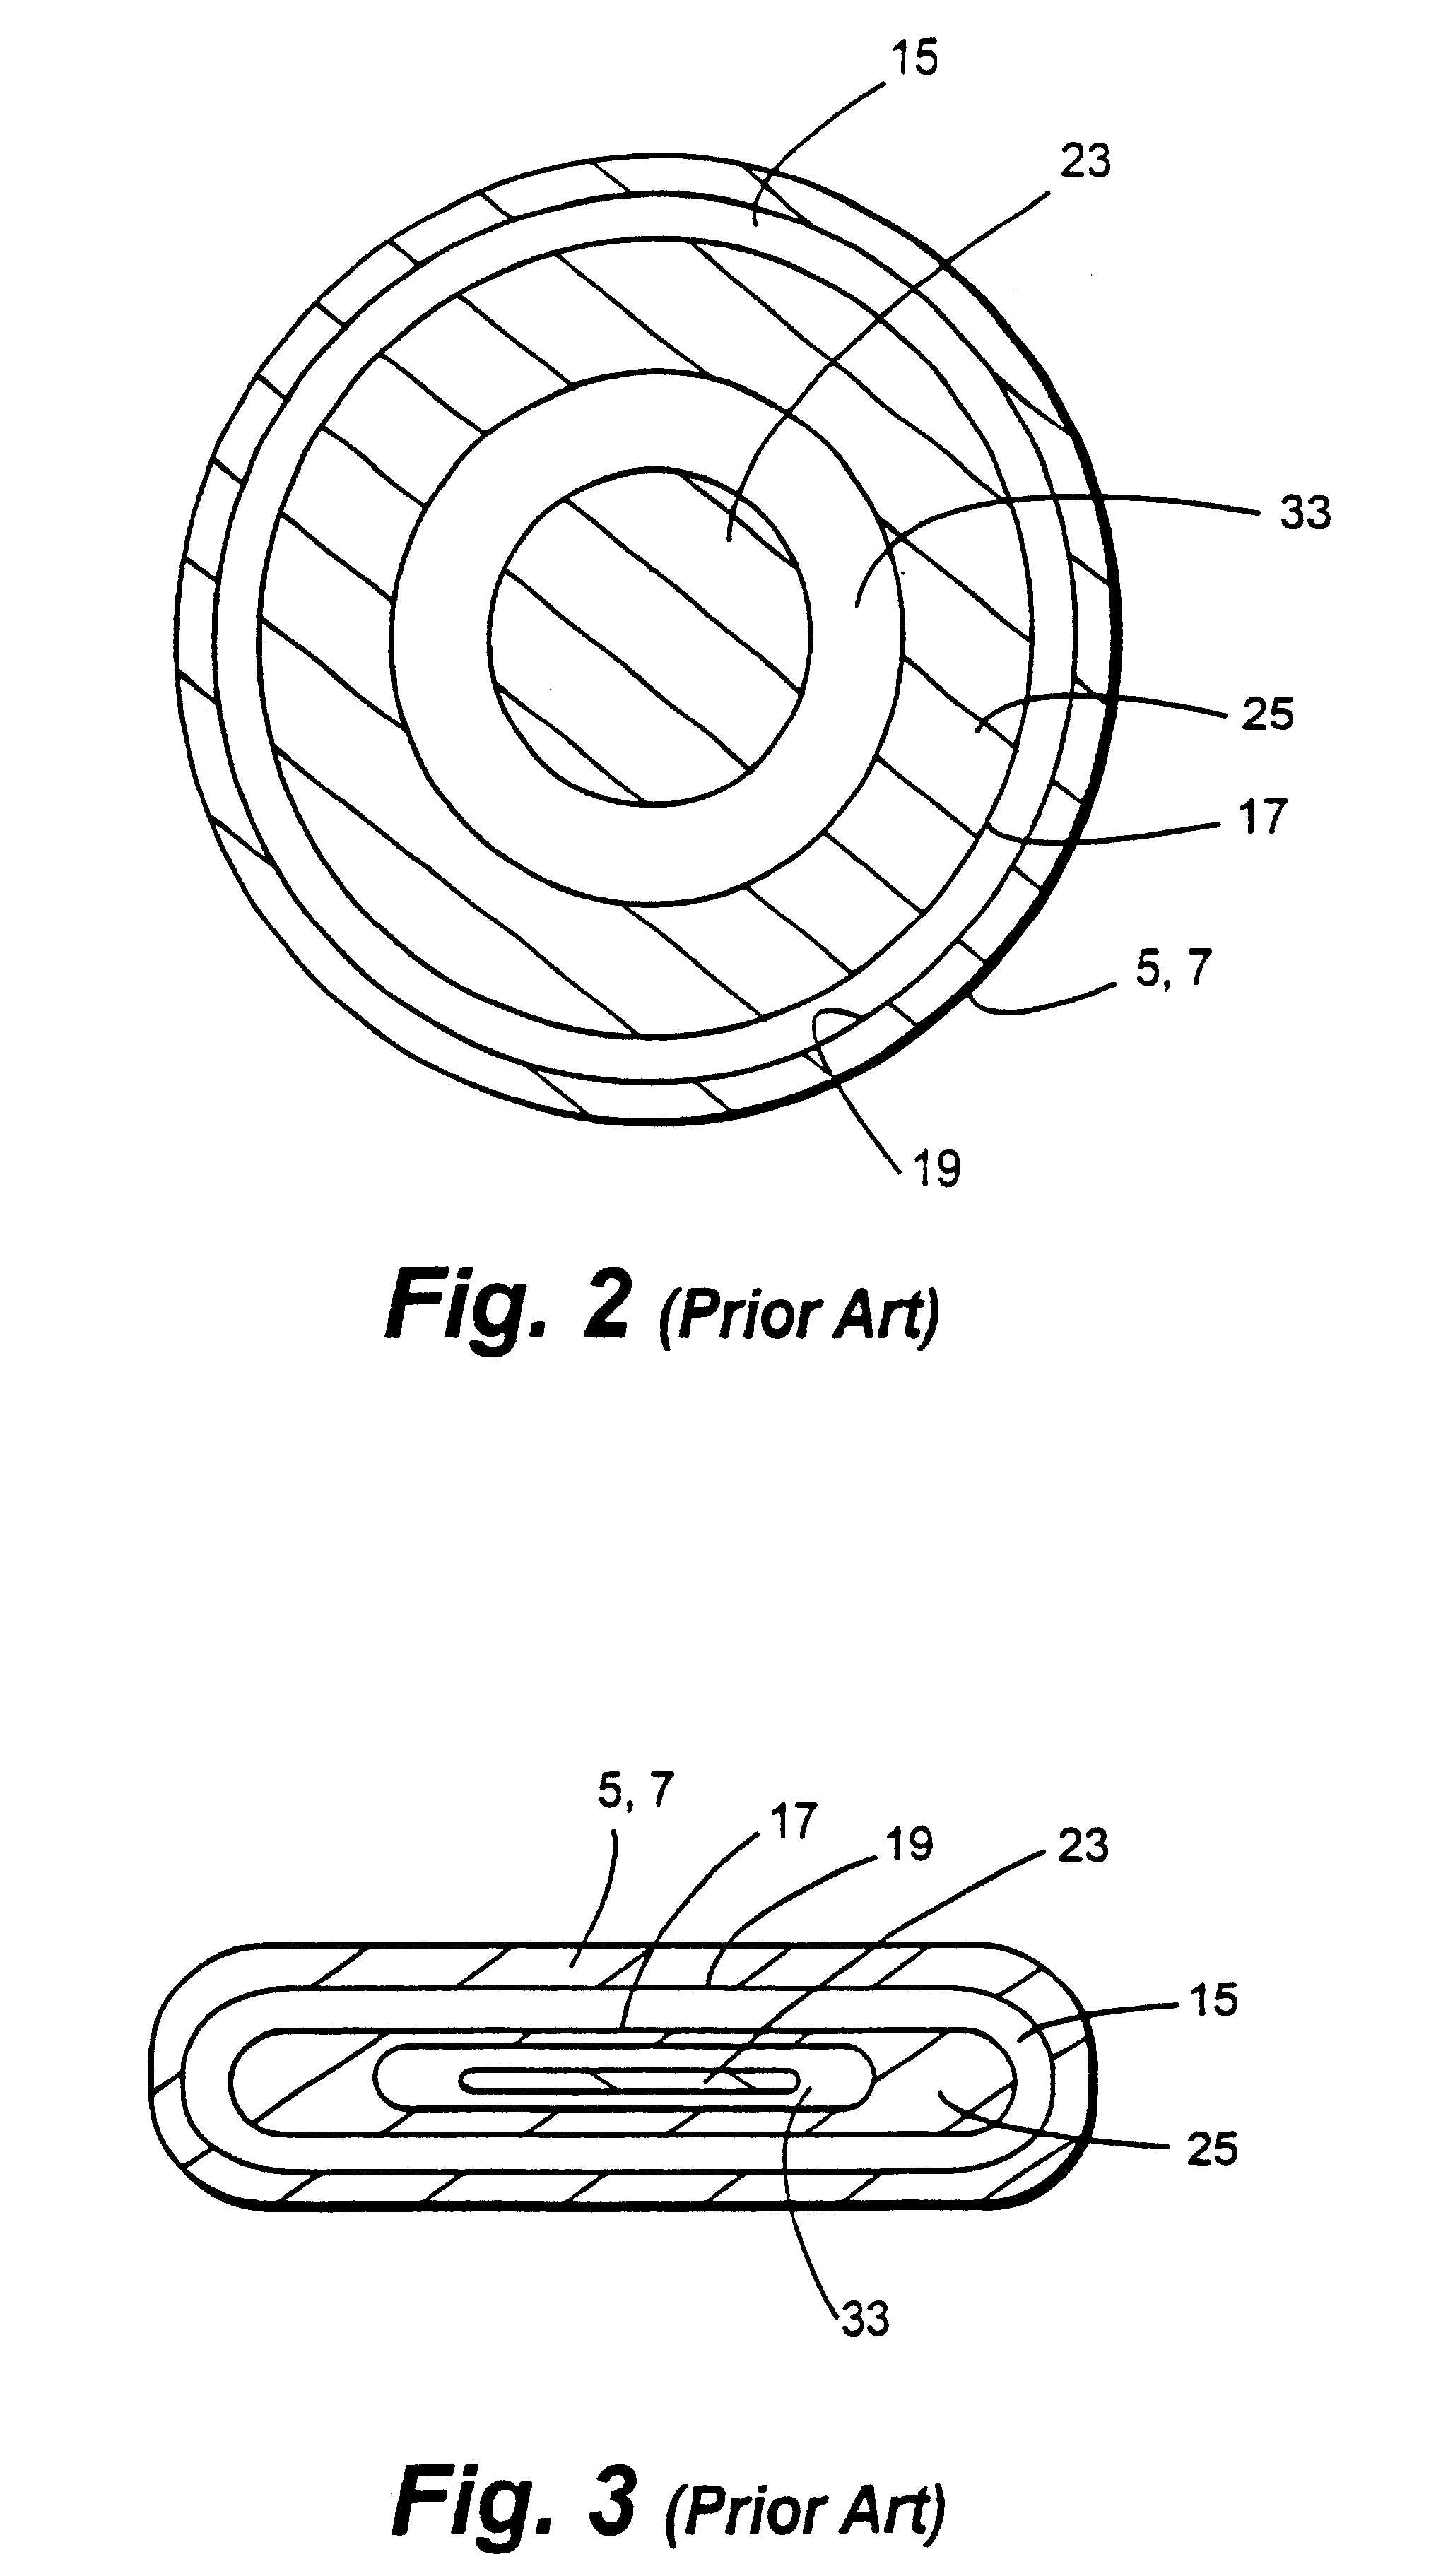 Cold cathode ion beam deposition apparatus with segregated gas flow